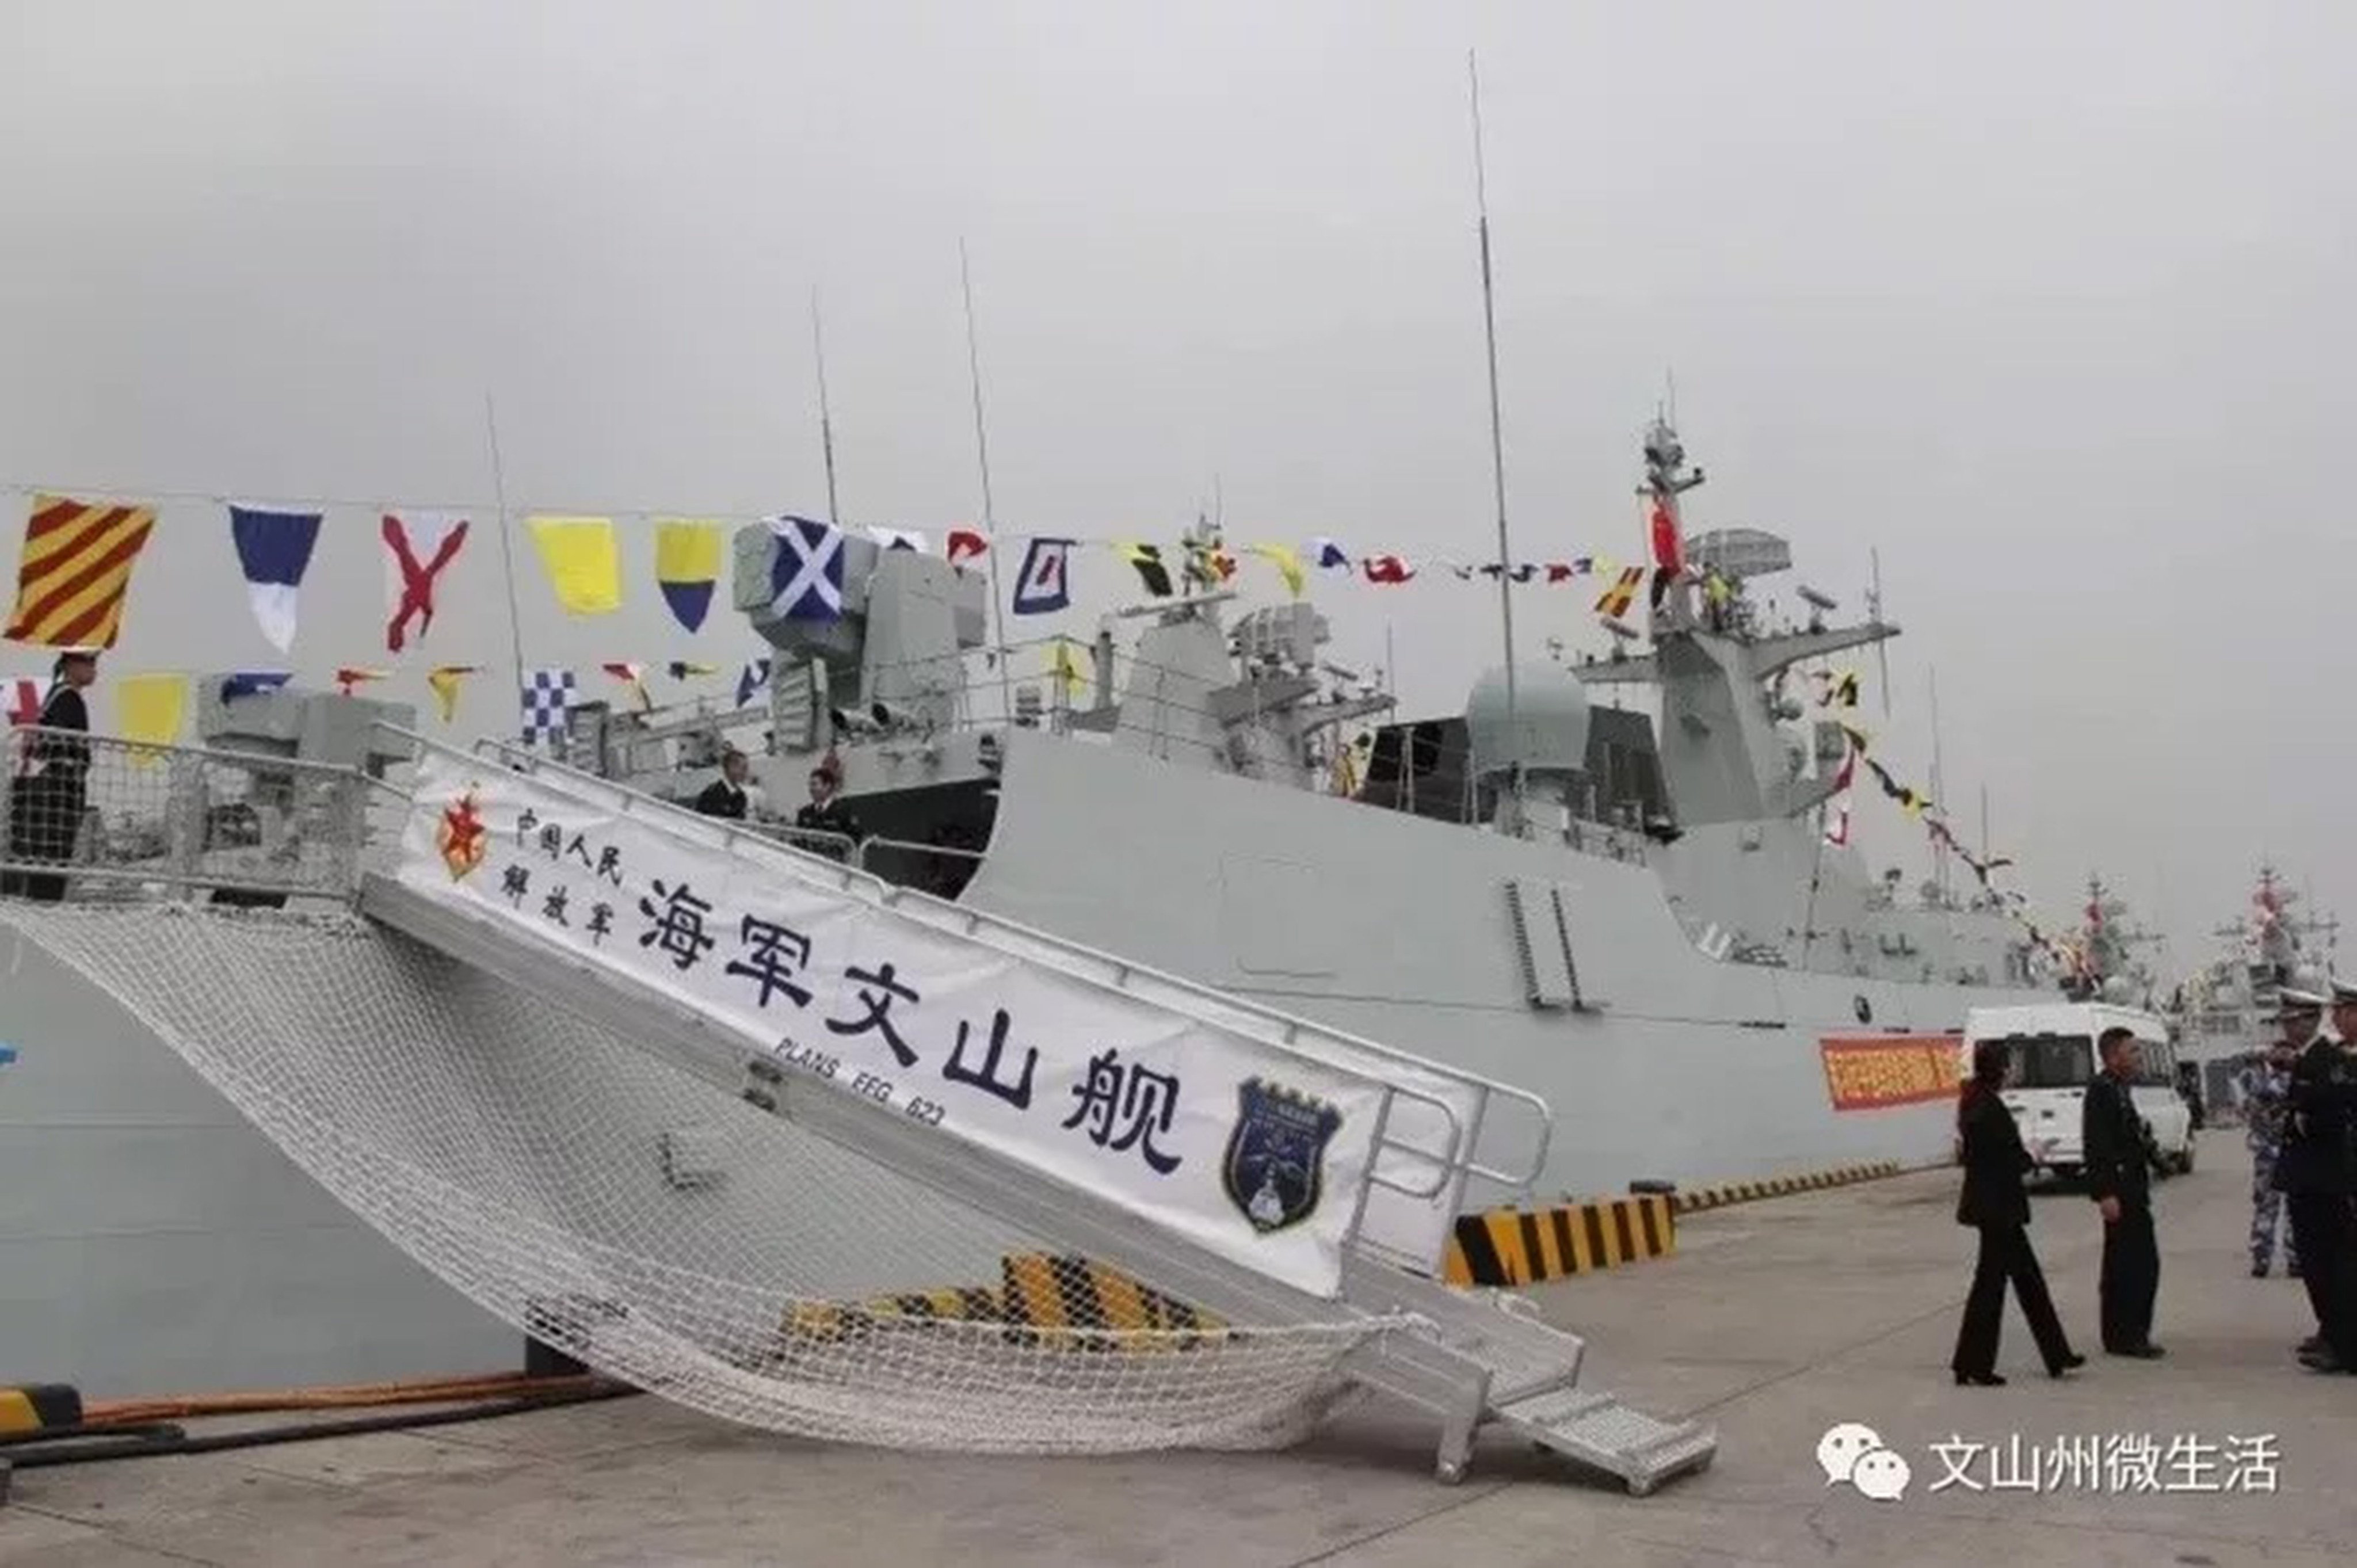 The Chinese Type 056A corvette “Wenshan” is one of two PLA Navy warships that have spent most of the last four months docked at a Cambodian naval base. Photo: Weibo